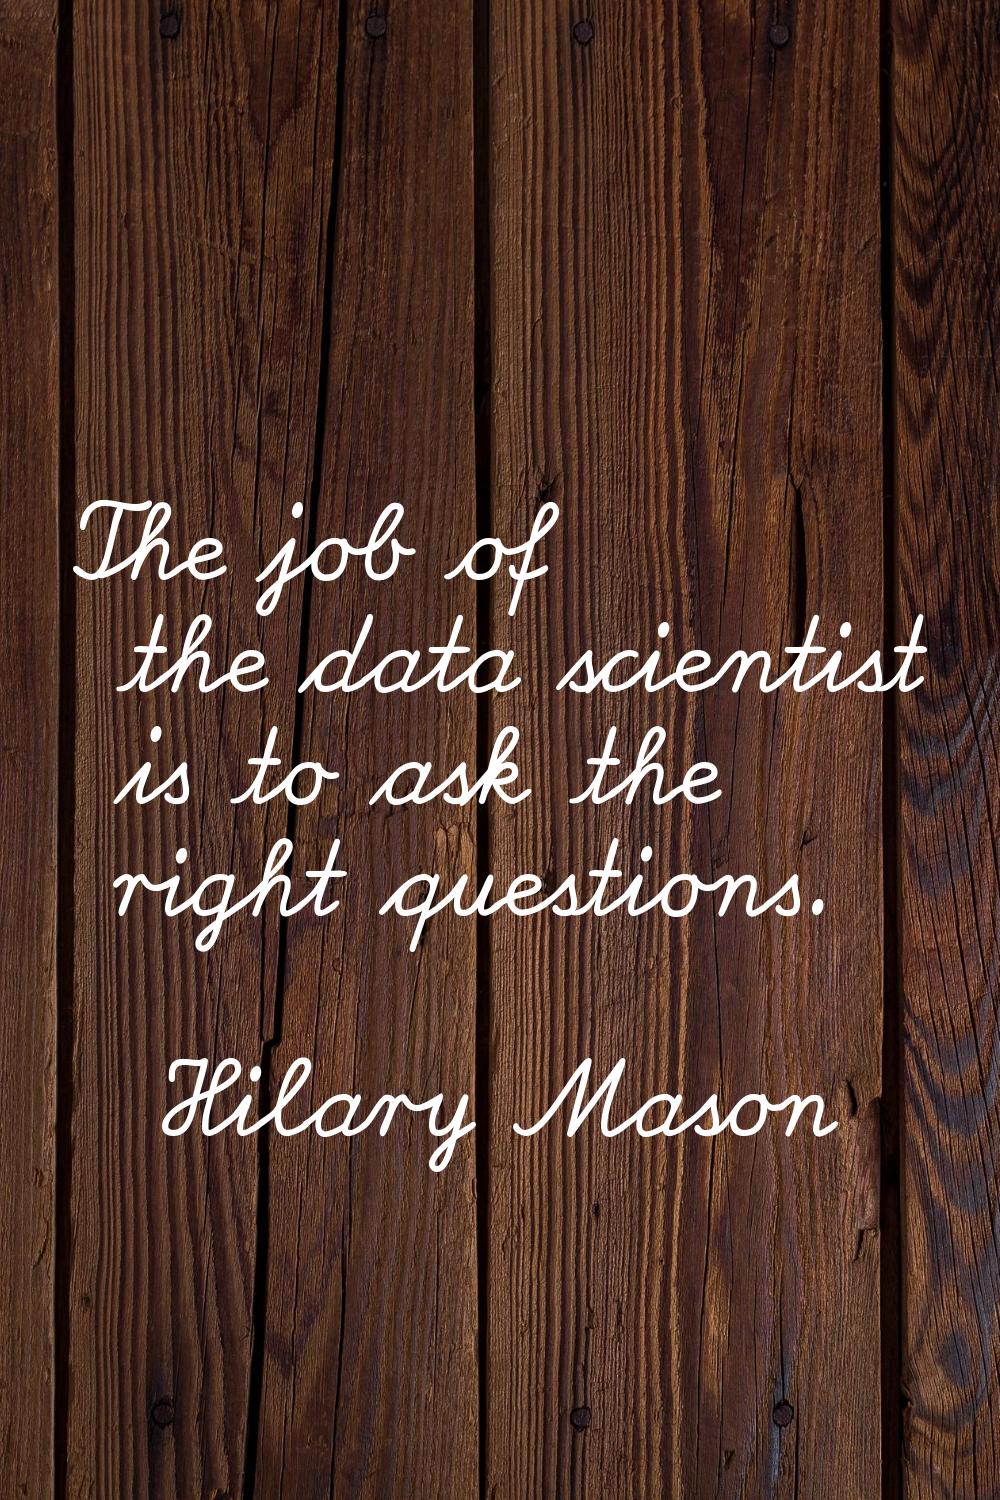 The job of the data scientist is to ask the right questions.